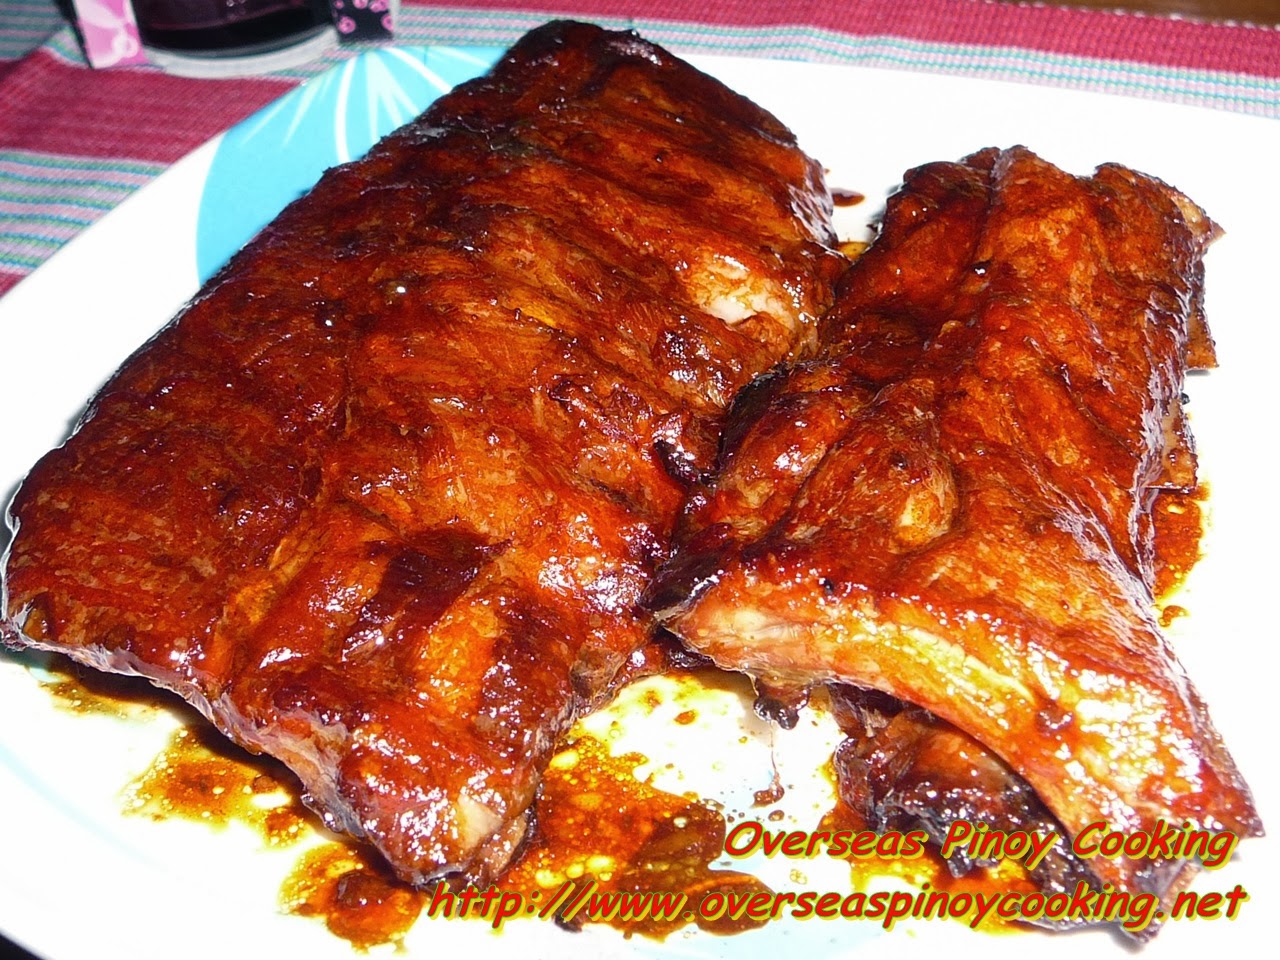 Overseas Pinoy Cooking Baby Back Ribs, Pinoy Style